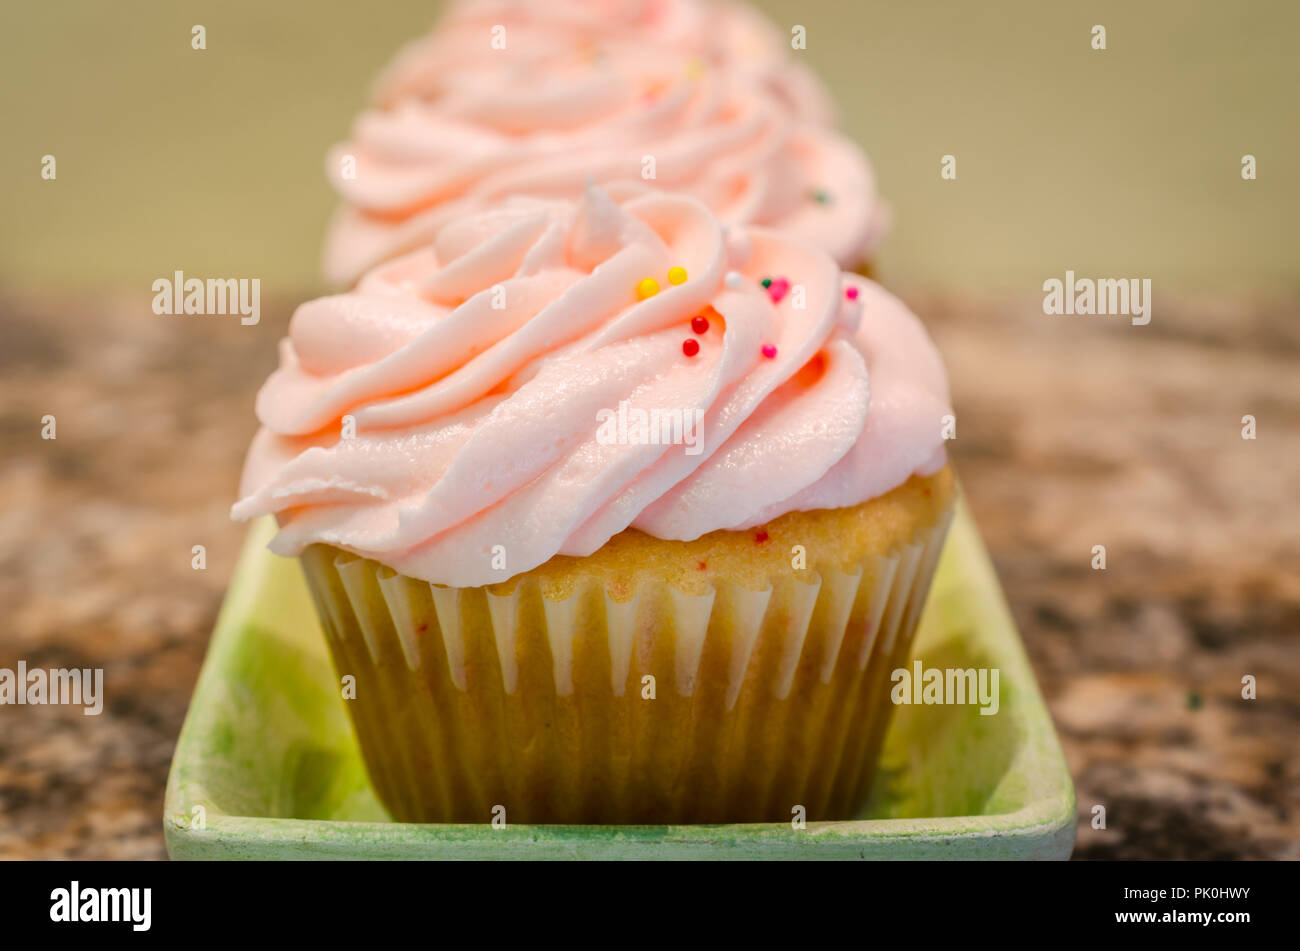 Light pink butter cream frosting swirled on top of fresh homemade cupcake. Colorful candy sprinkles sprinkled on top. Delicious sweet treat for party. Stock Photo